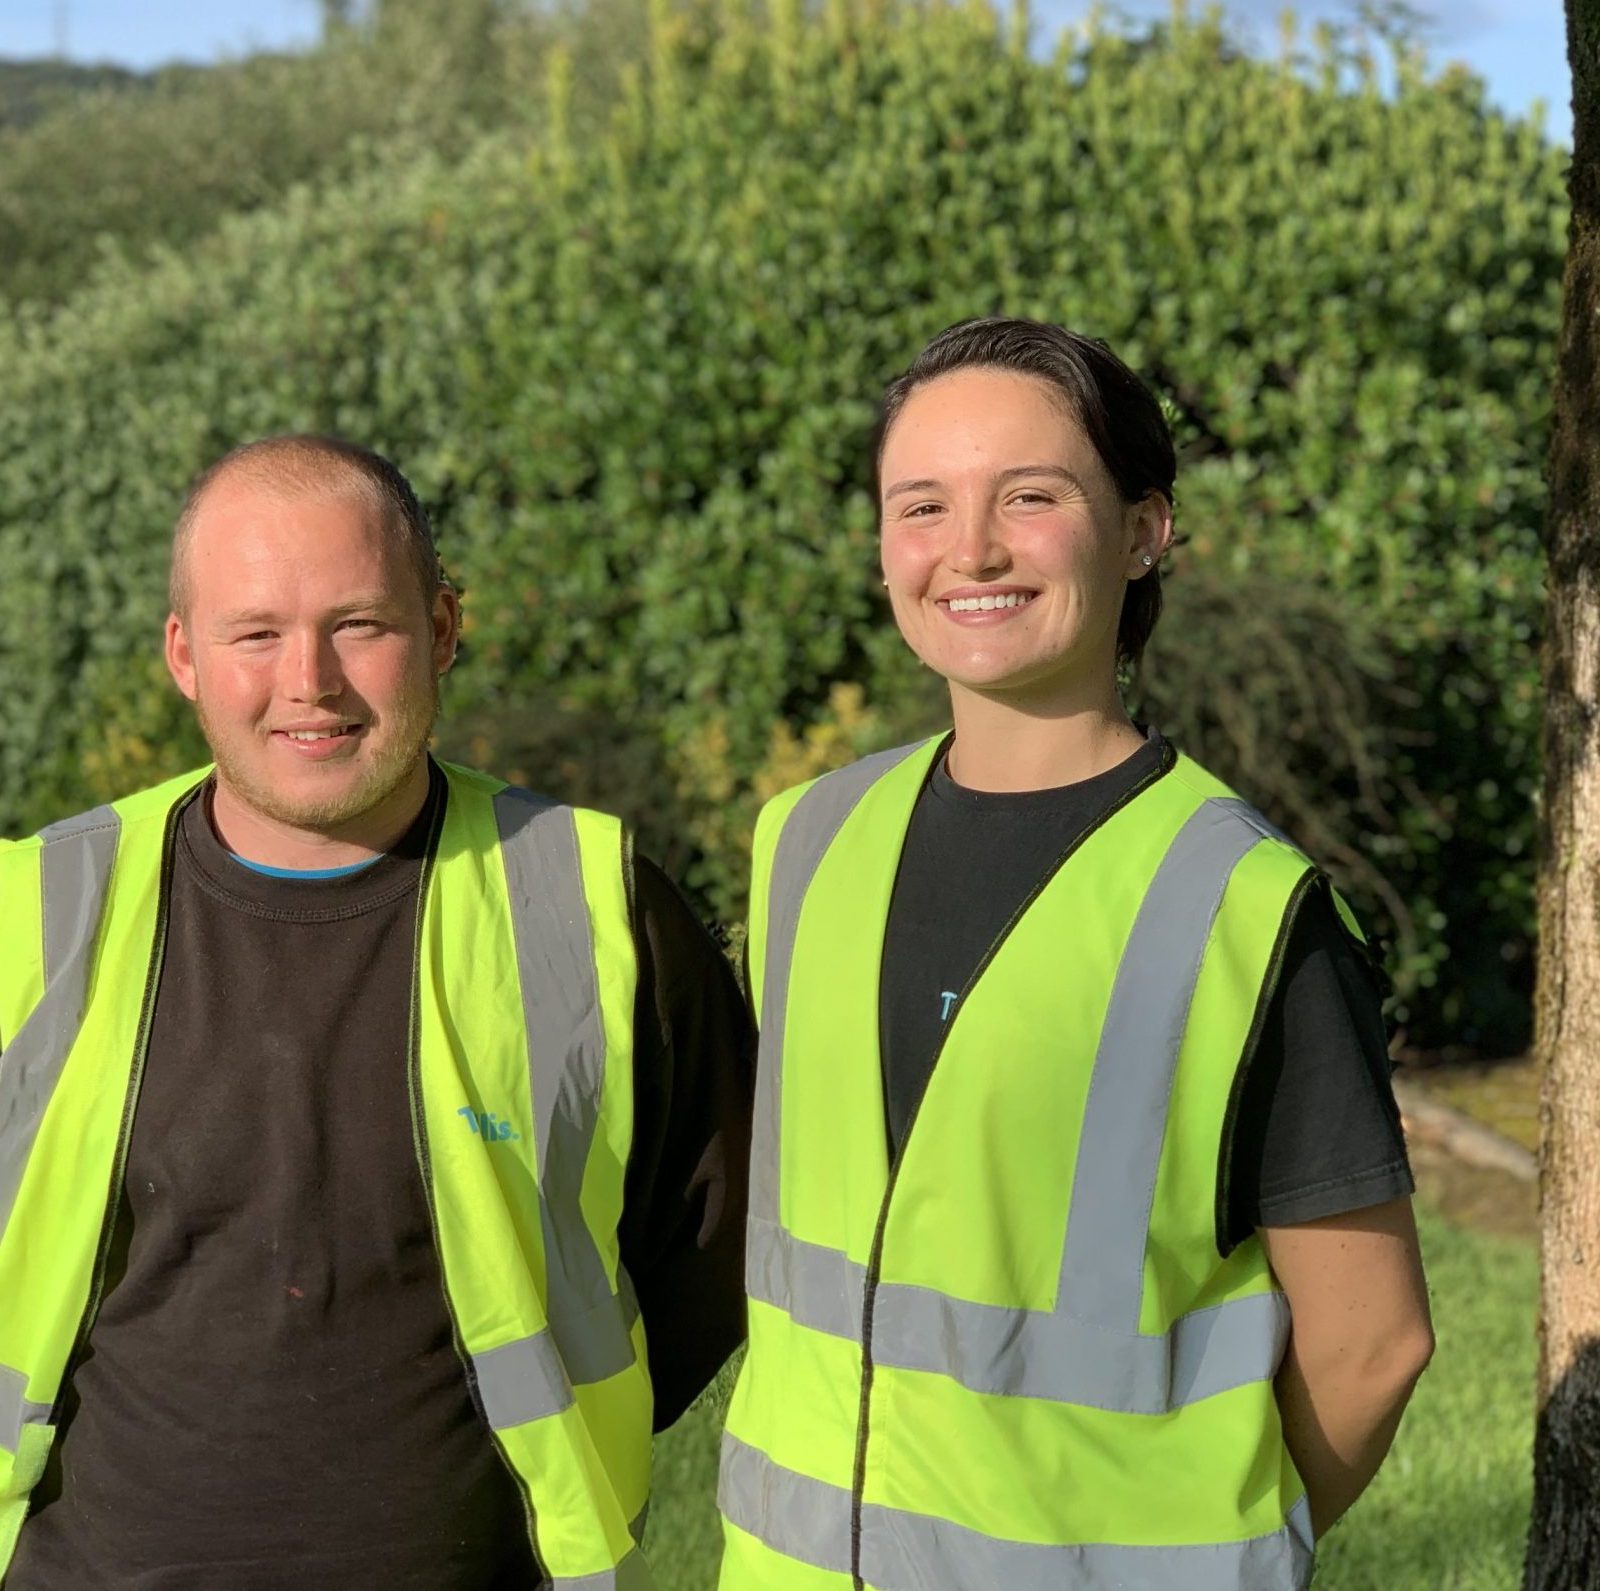 Trivallis Housing Landlord Wales Two workers doing apprenticeships, wearing high-visibility vests stand outdoors, smiling. the man is on the left and the woman is on the right, with a sunny green landscape and a tree in the background.